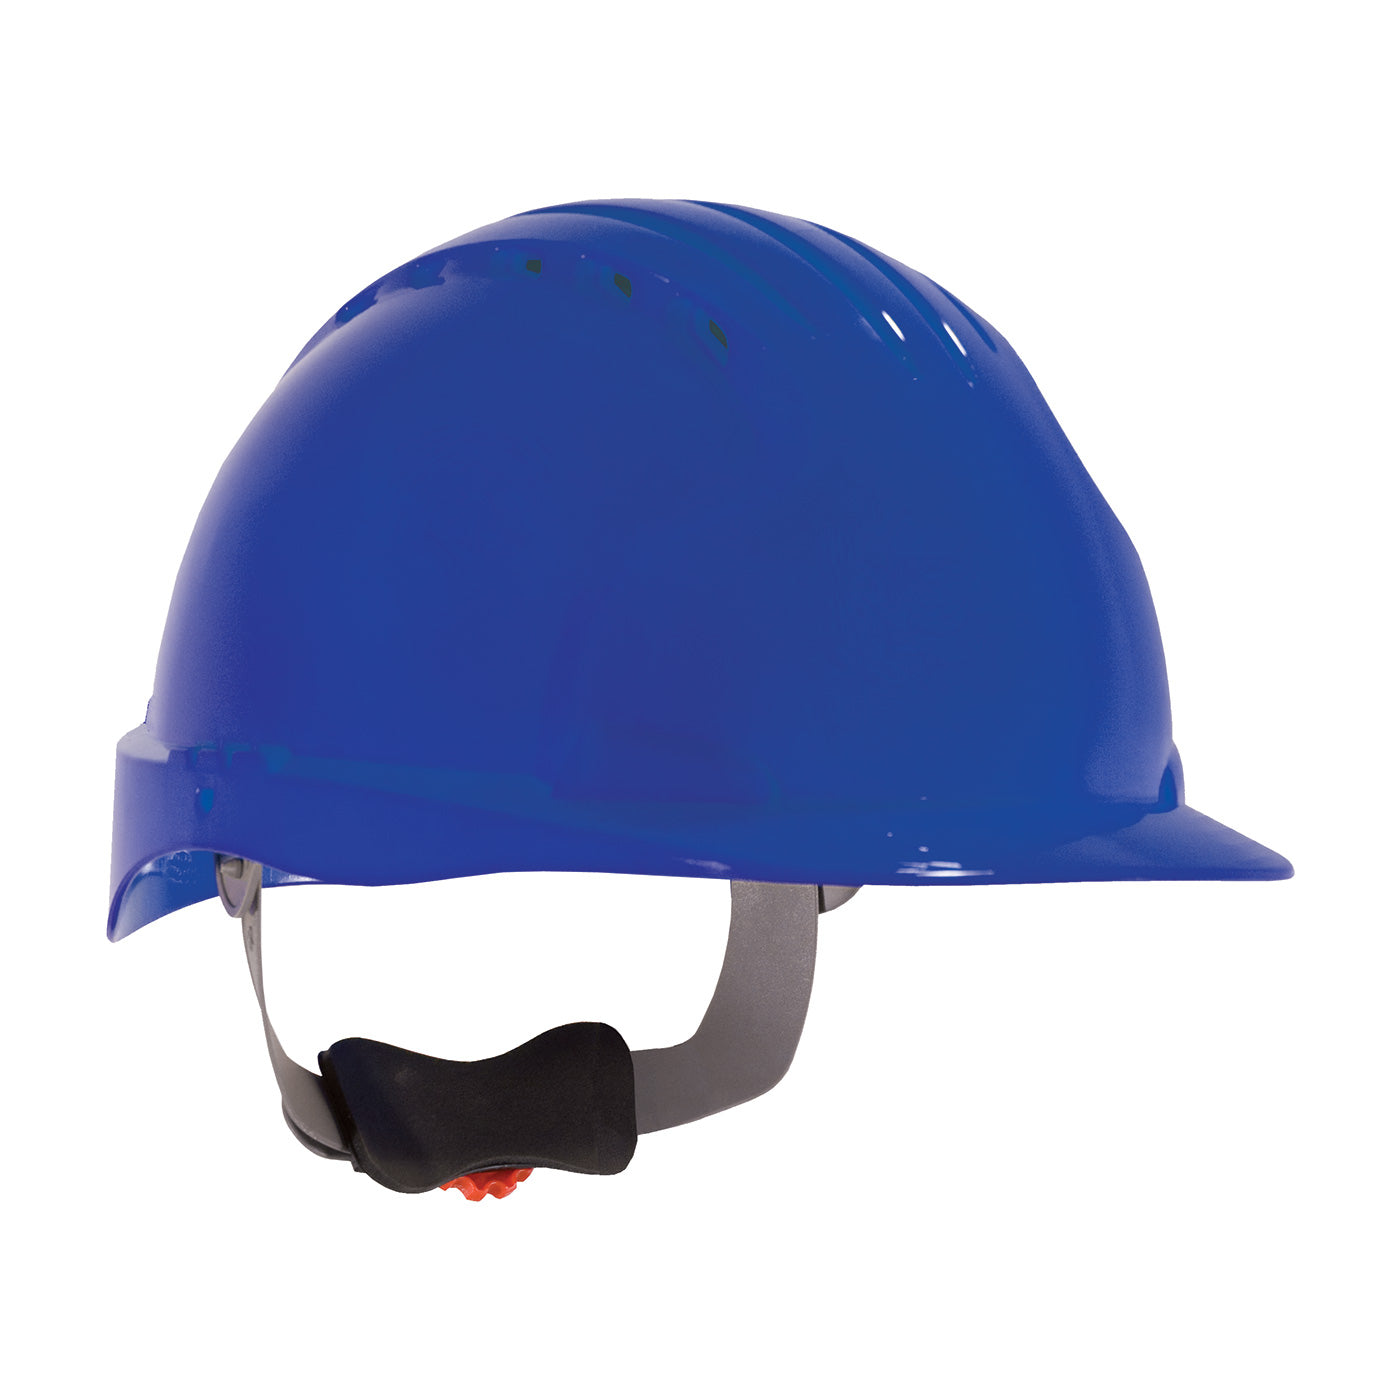 Evolution® Deluxe 6151 Standard Brim, Vented Hard Hat with HDPE Shell, 6-Point Polyester Suspension and Wheel Ratchet Adjustment